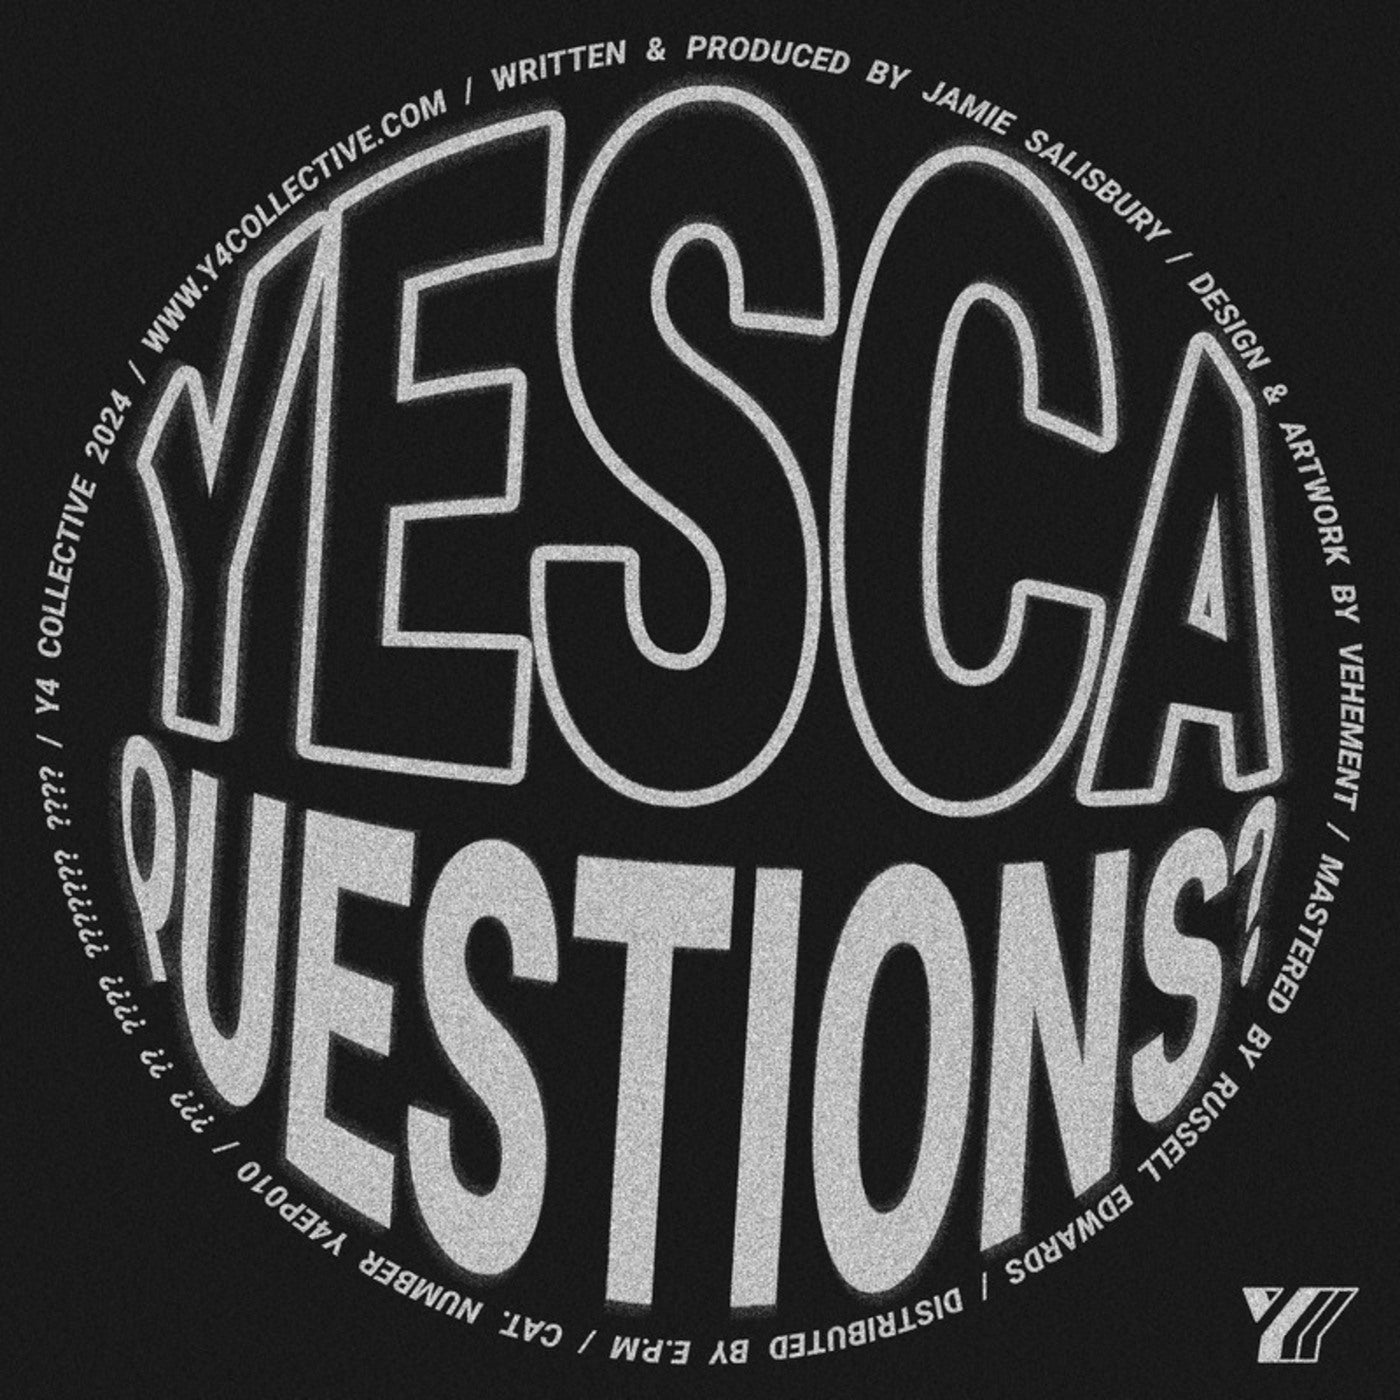 Cover - Yesca - Are They Staring at Me? (Original Mix)